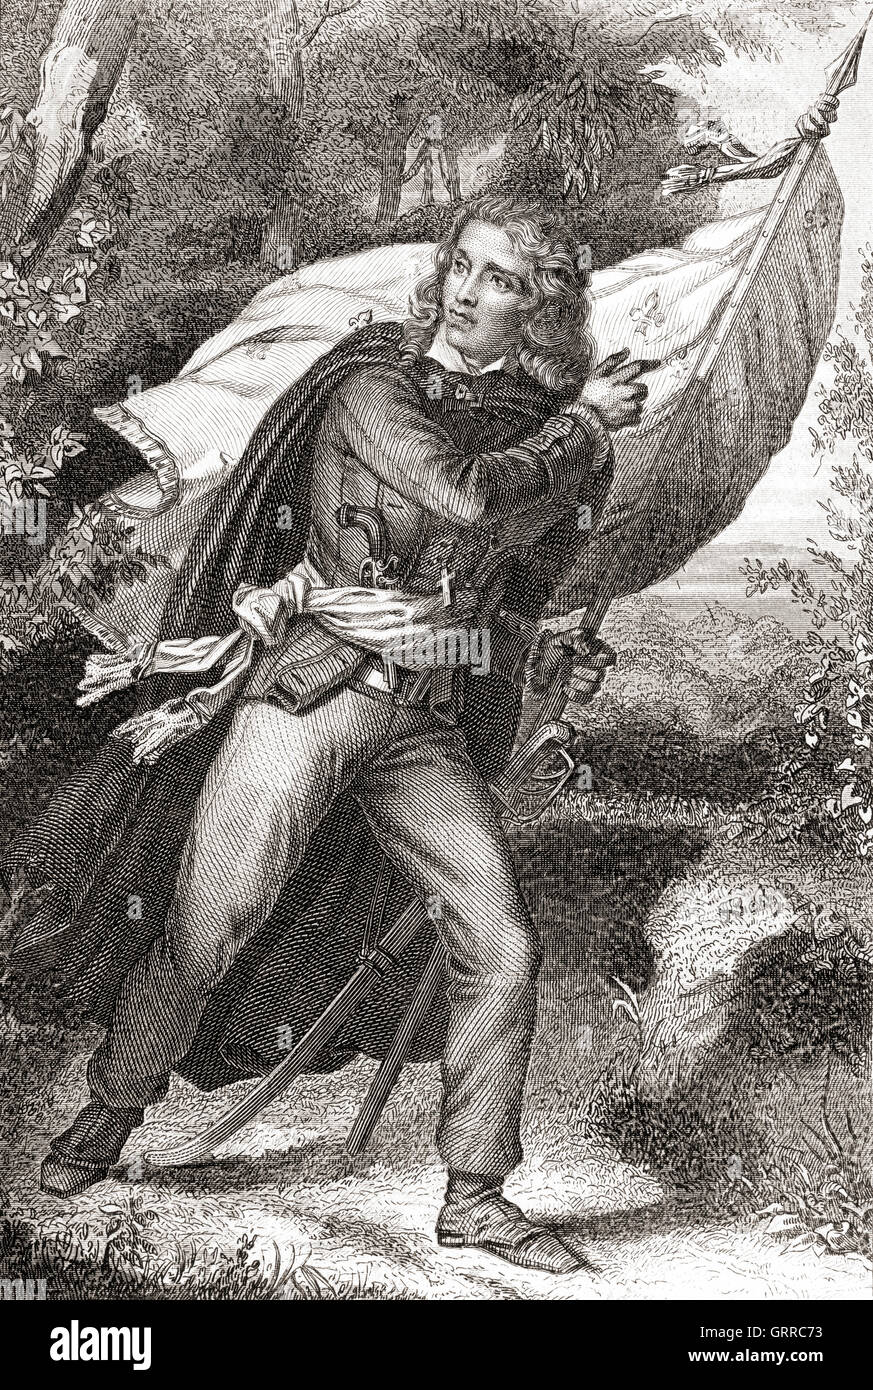 Jacques Cathelineau aka Saint of Anjou, 1759 – 1793. French Vendéan insurrection leader during the French Revolution. Stock Photo